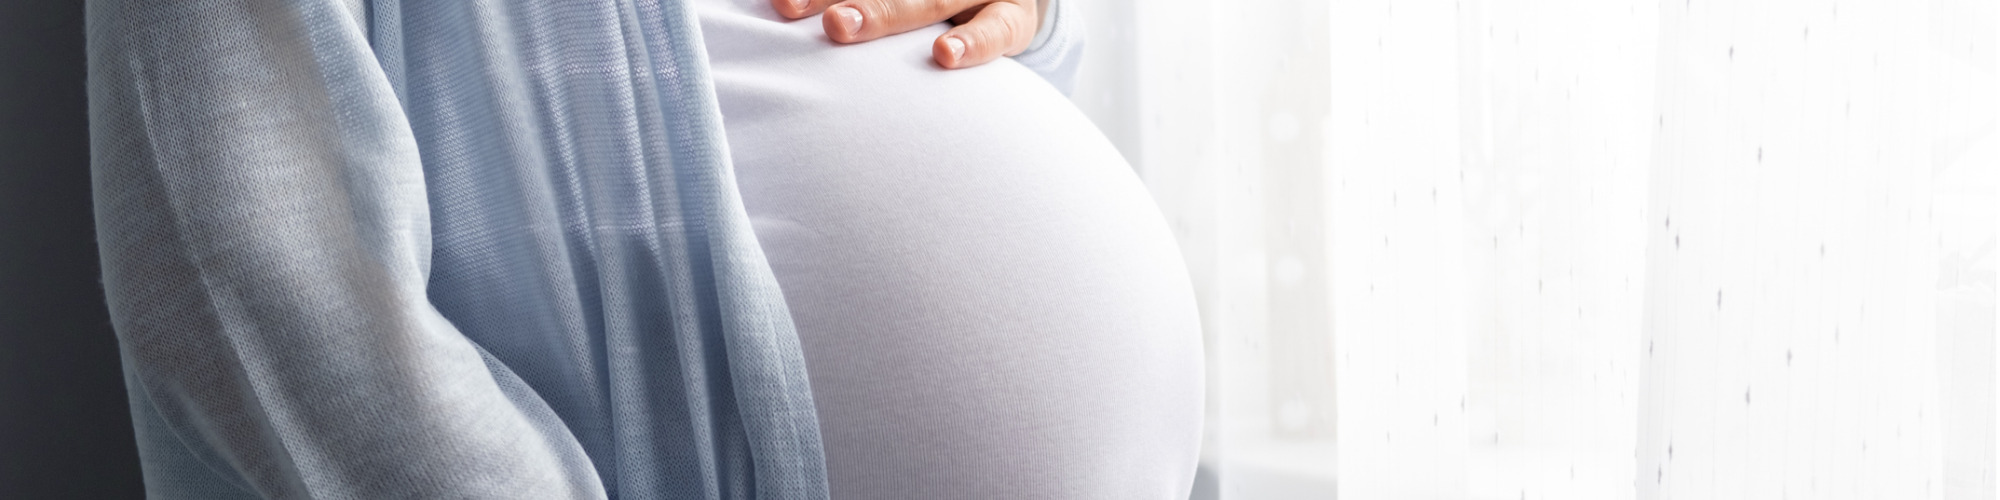 Maternity Claims - Experts, Quantum & Tips for Clinical Negligence Lawyers 